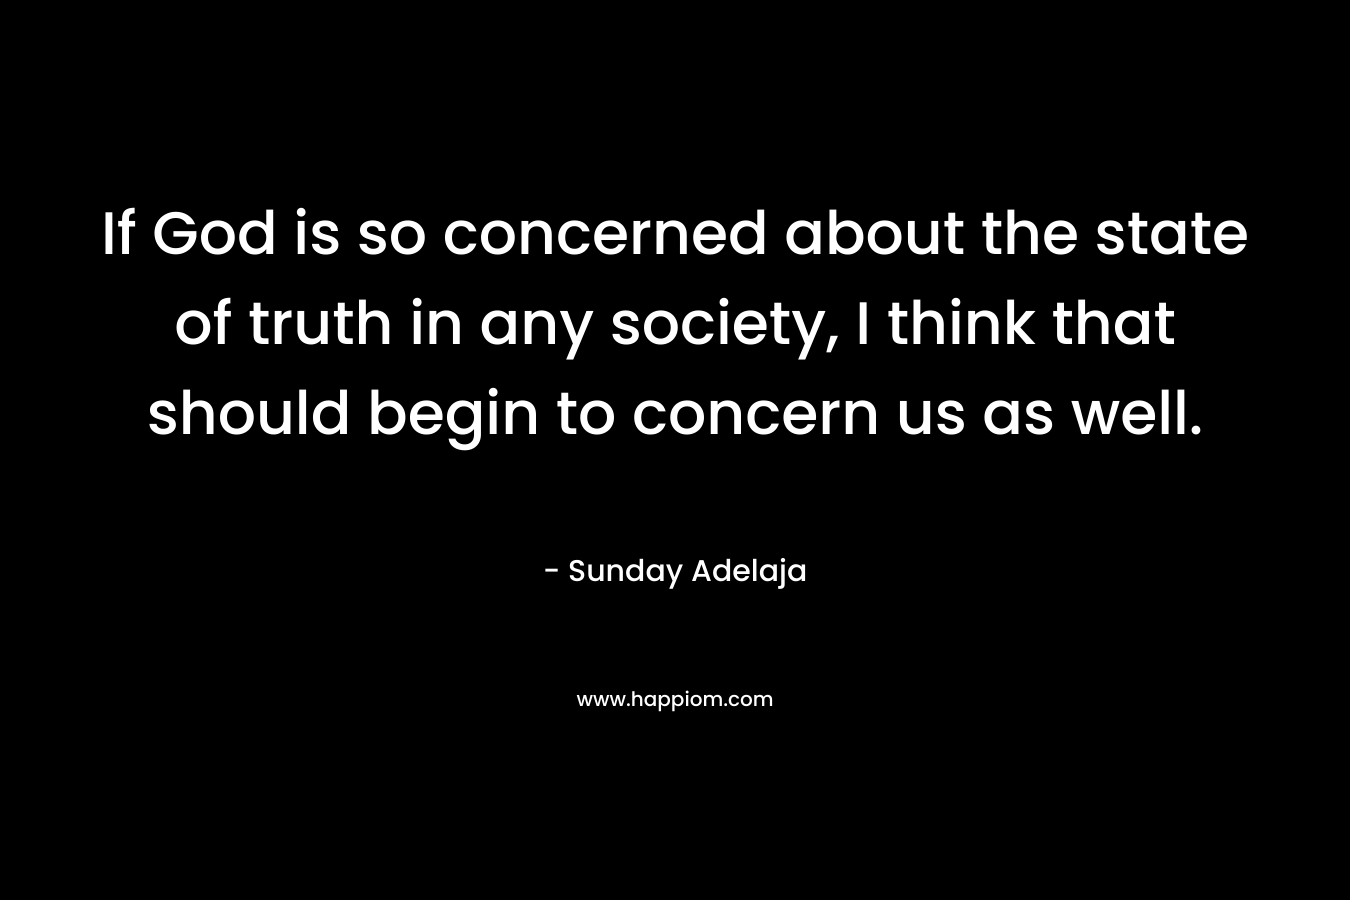 If God is so concerned about the state of truth in any society, I think that should begin to concern us as well.